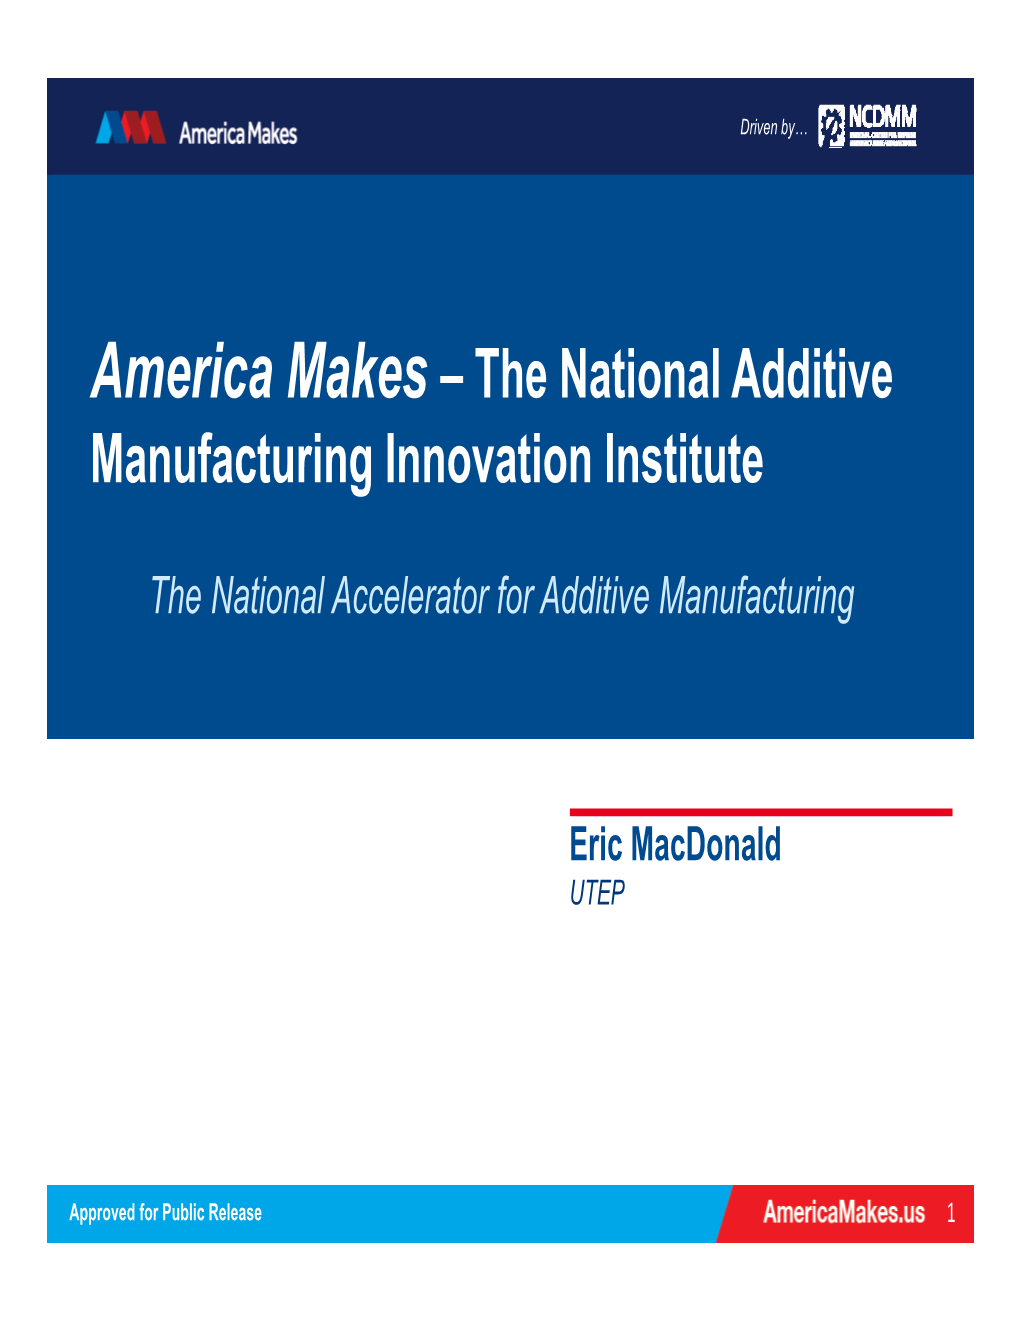 America Makes – the National Additive Manufacturing Innovation Institute